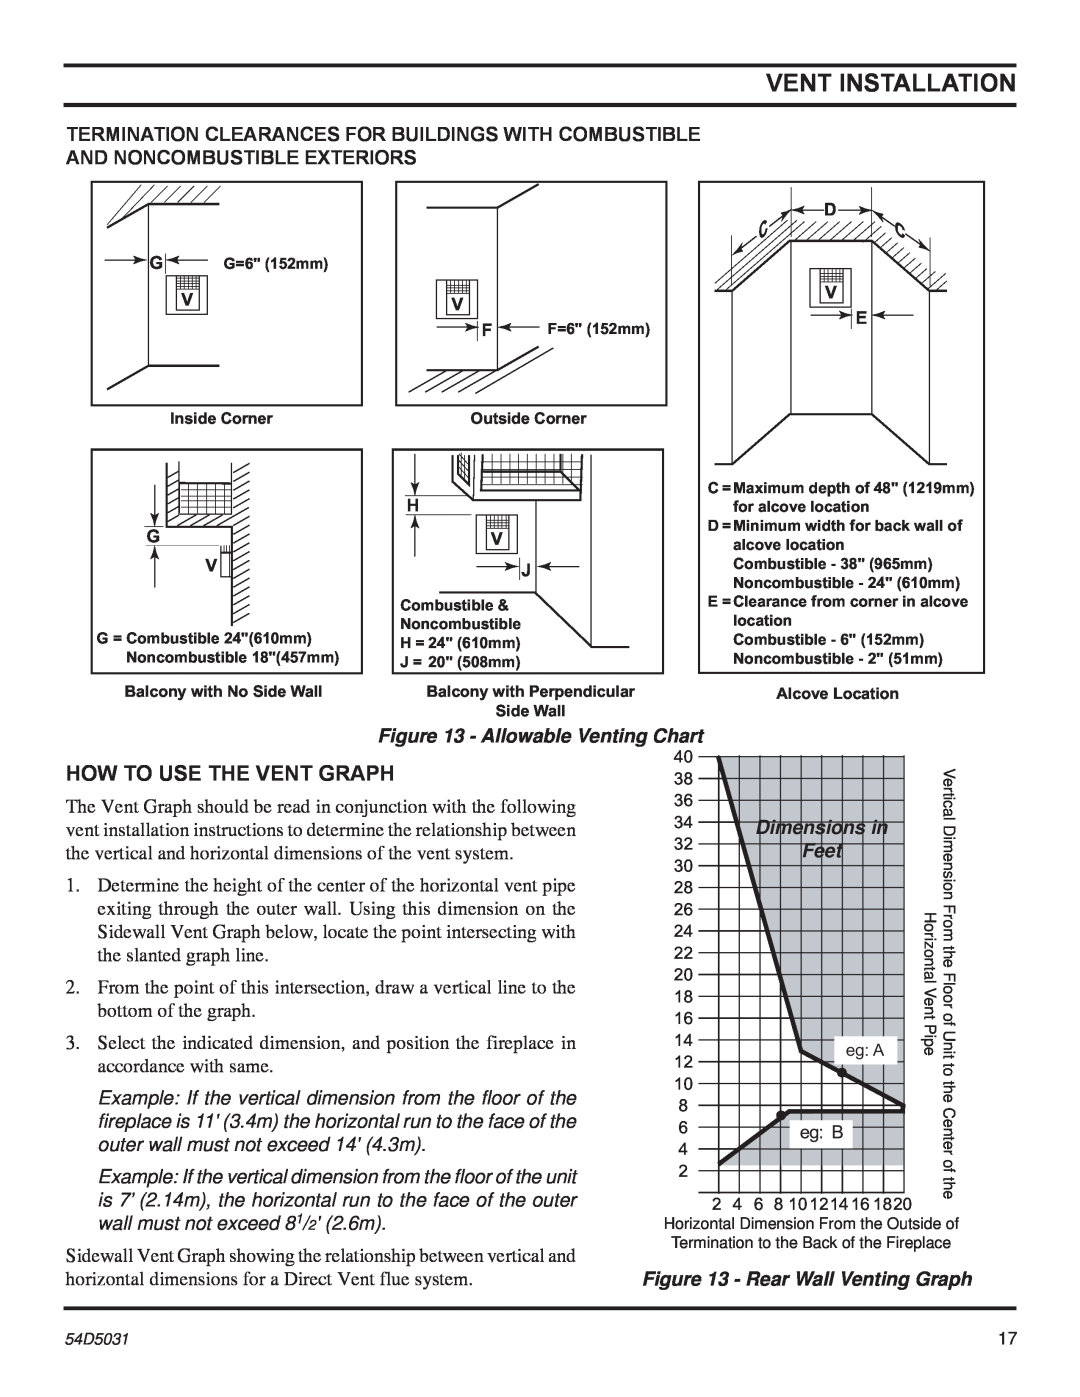 Monessen Hearth HBDV300 How To Use The Vent Graph, Vent Installation, And Noncombustible Exteriors, Dimensions in, Feet 